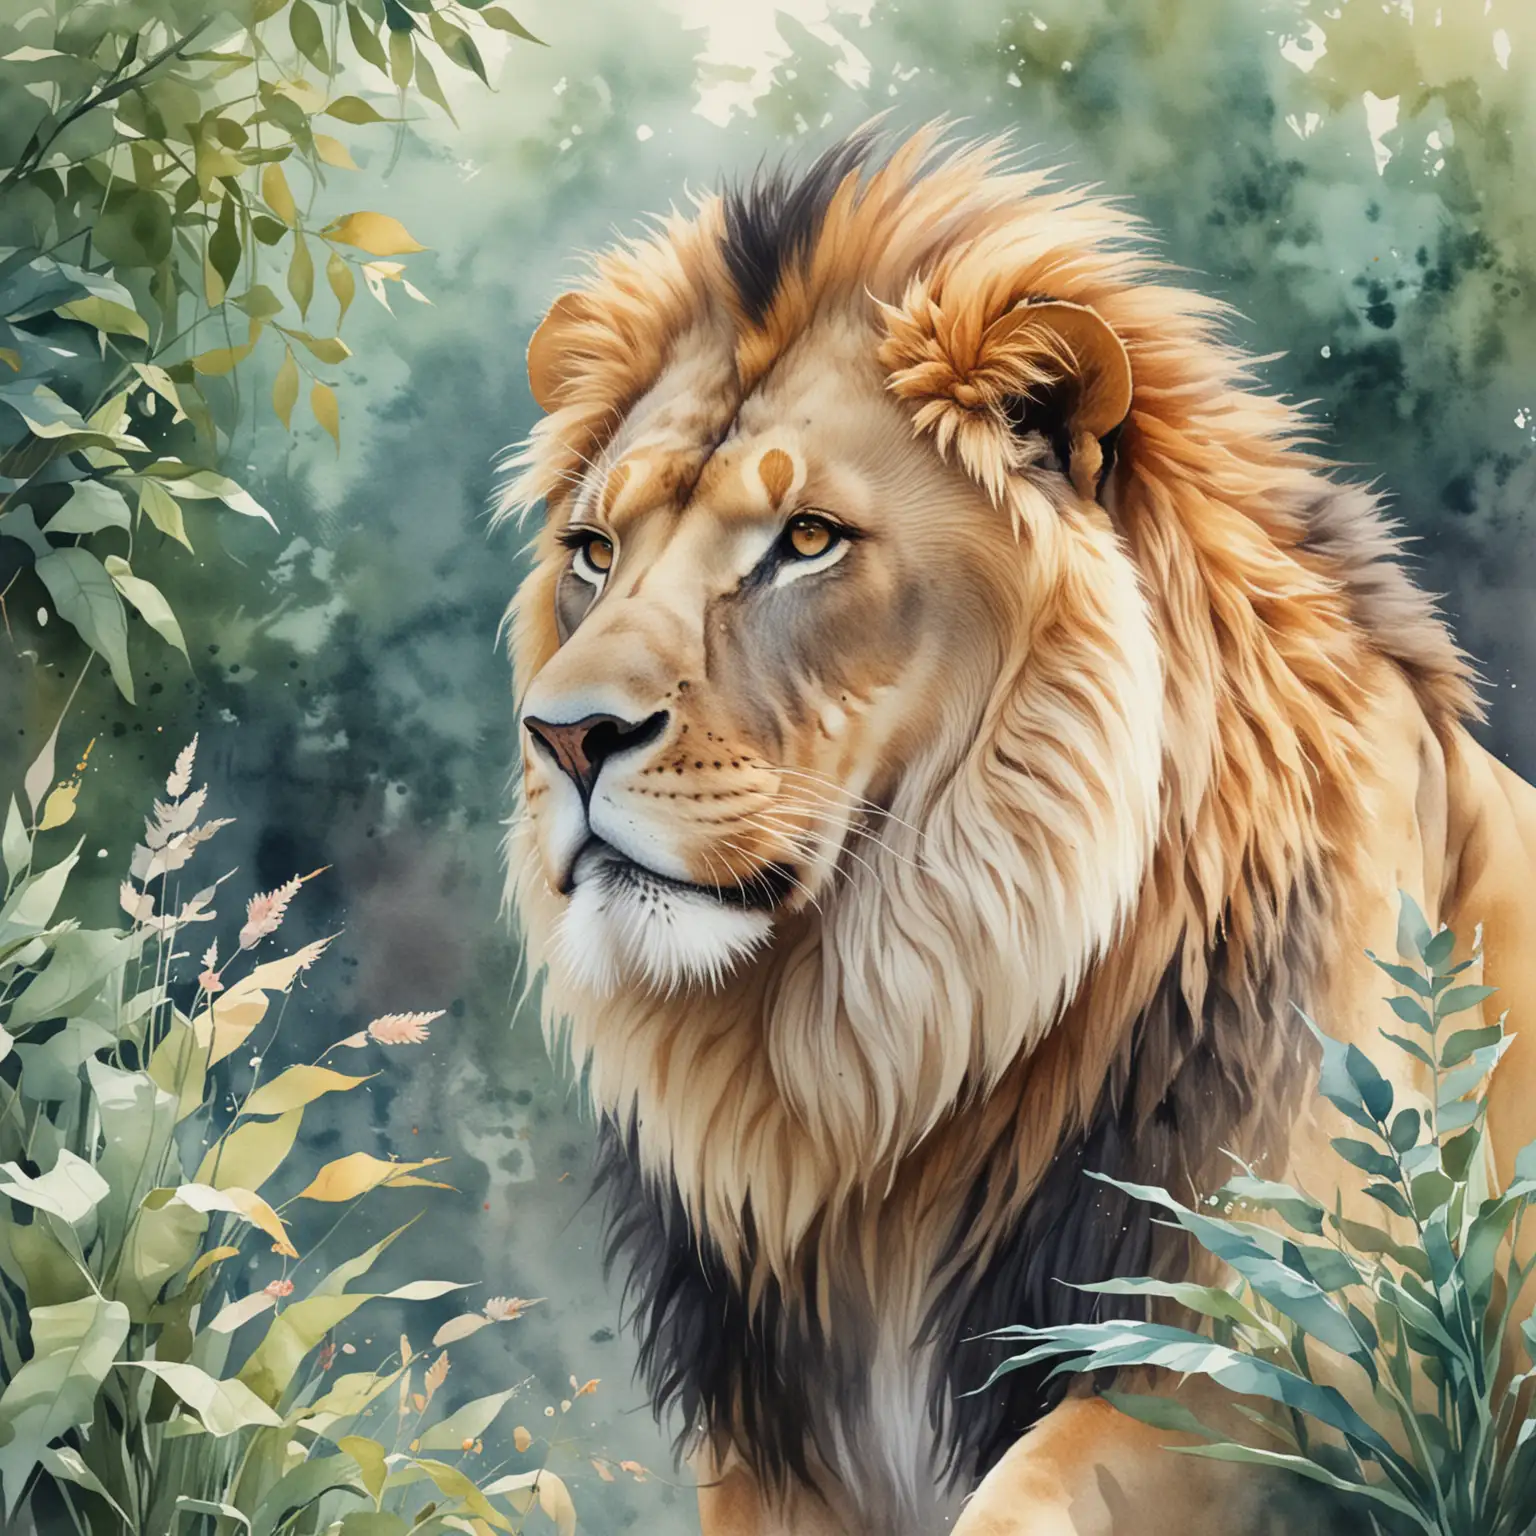 a lion in the zoo, subtle color cascade, painterly style, watercolors